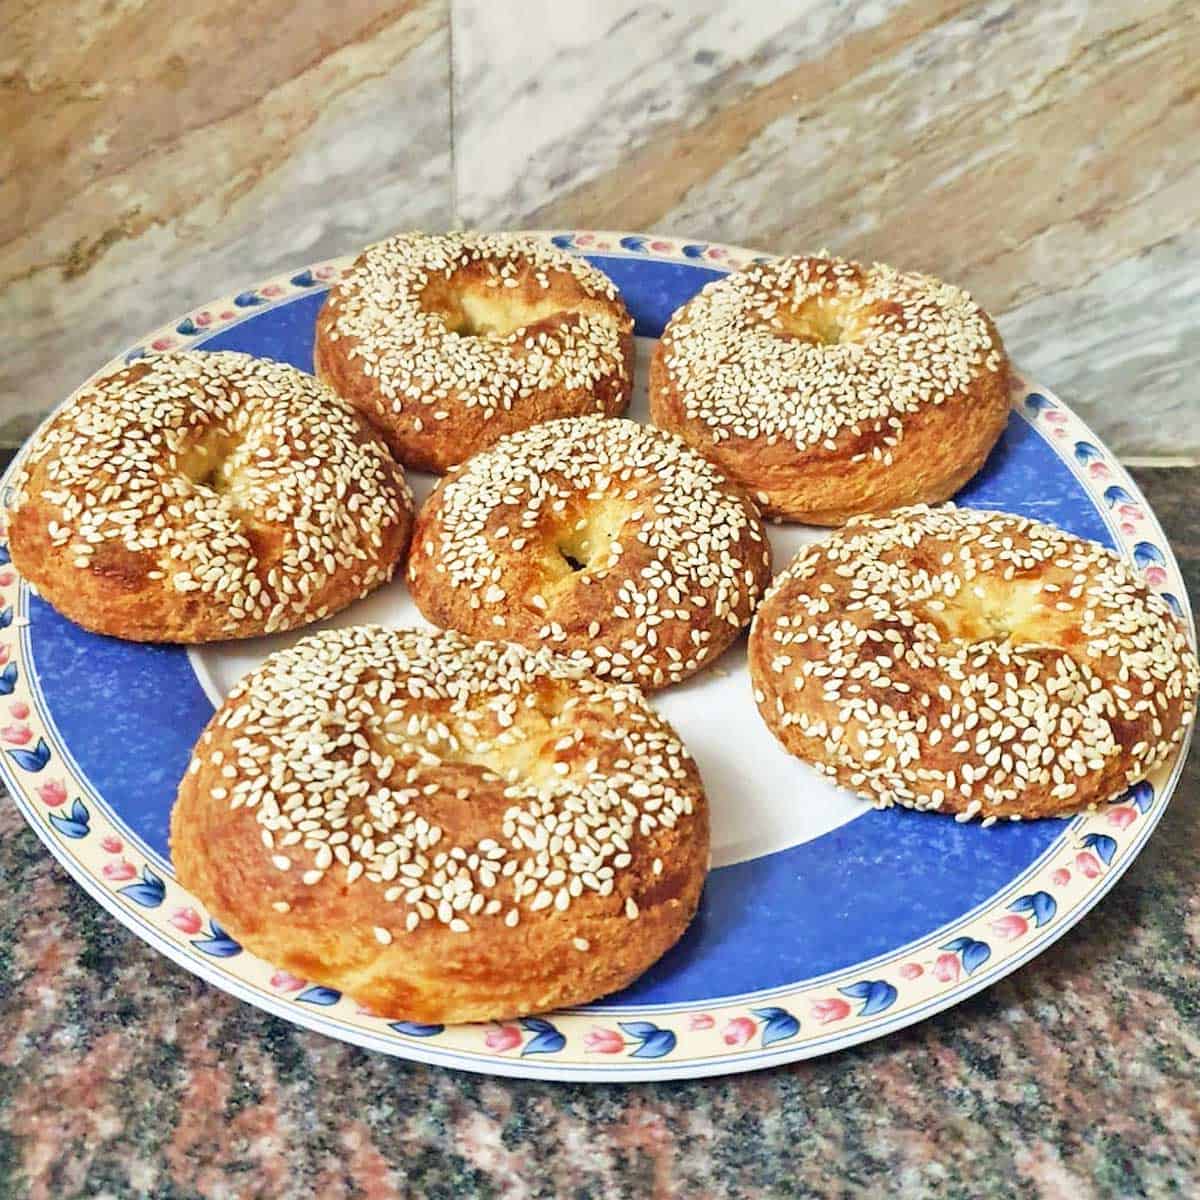 Keto bagels made by Vered DeLeeuw's dad.